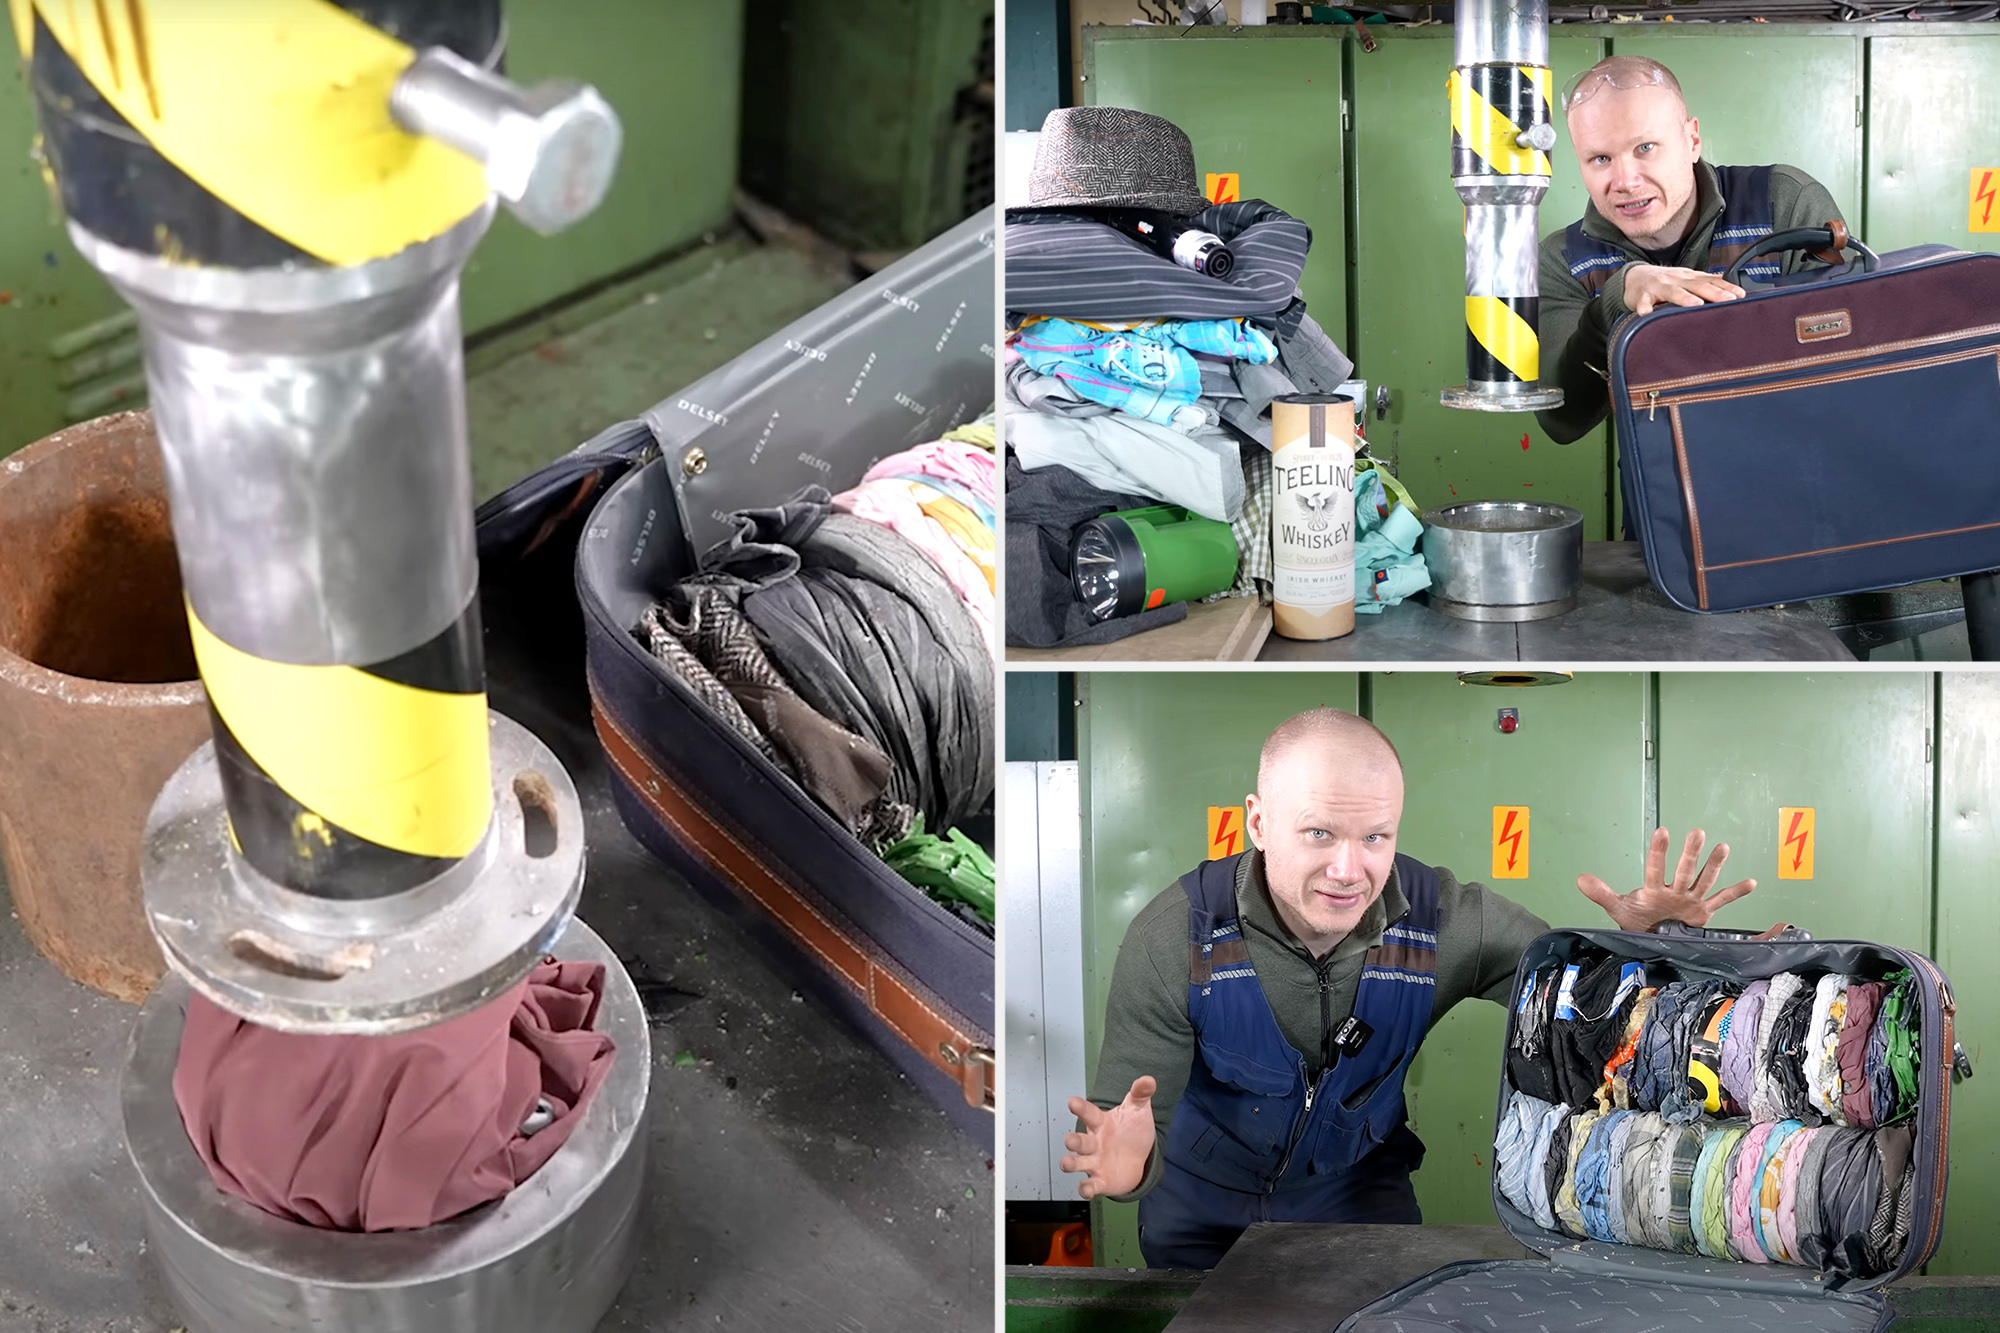 Finnish content creators Lauri Vuohensilta and Hanna Korpisaari comically compressed a massive mound of travel items into a single carry-on suitcase with help from a 150-ton hydraulic press — and with room to spare.